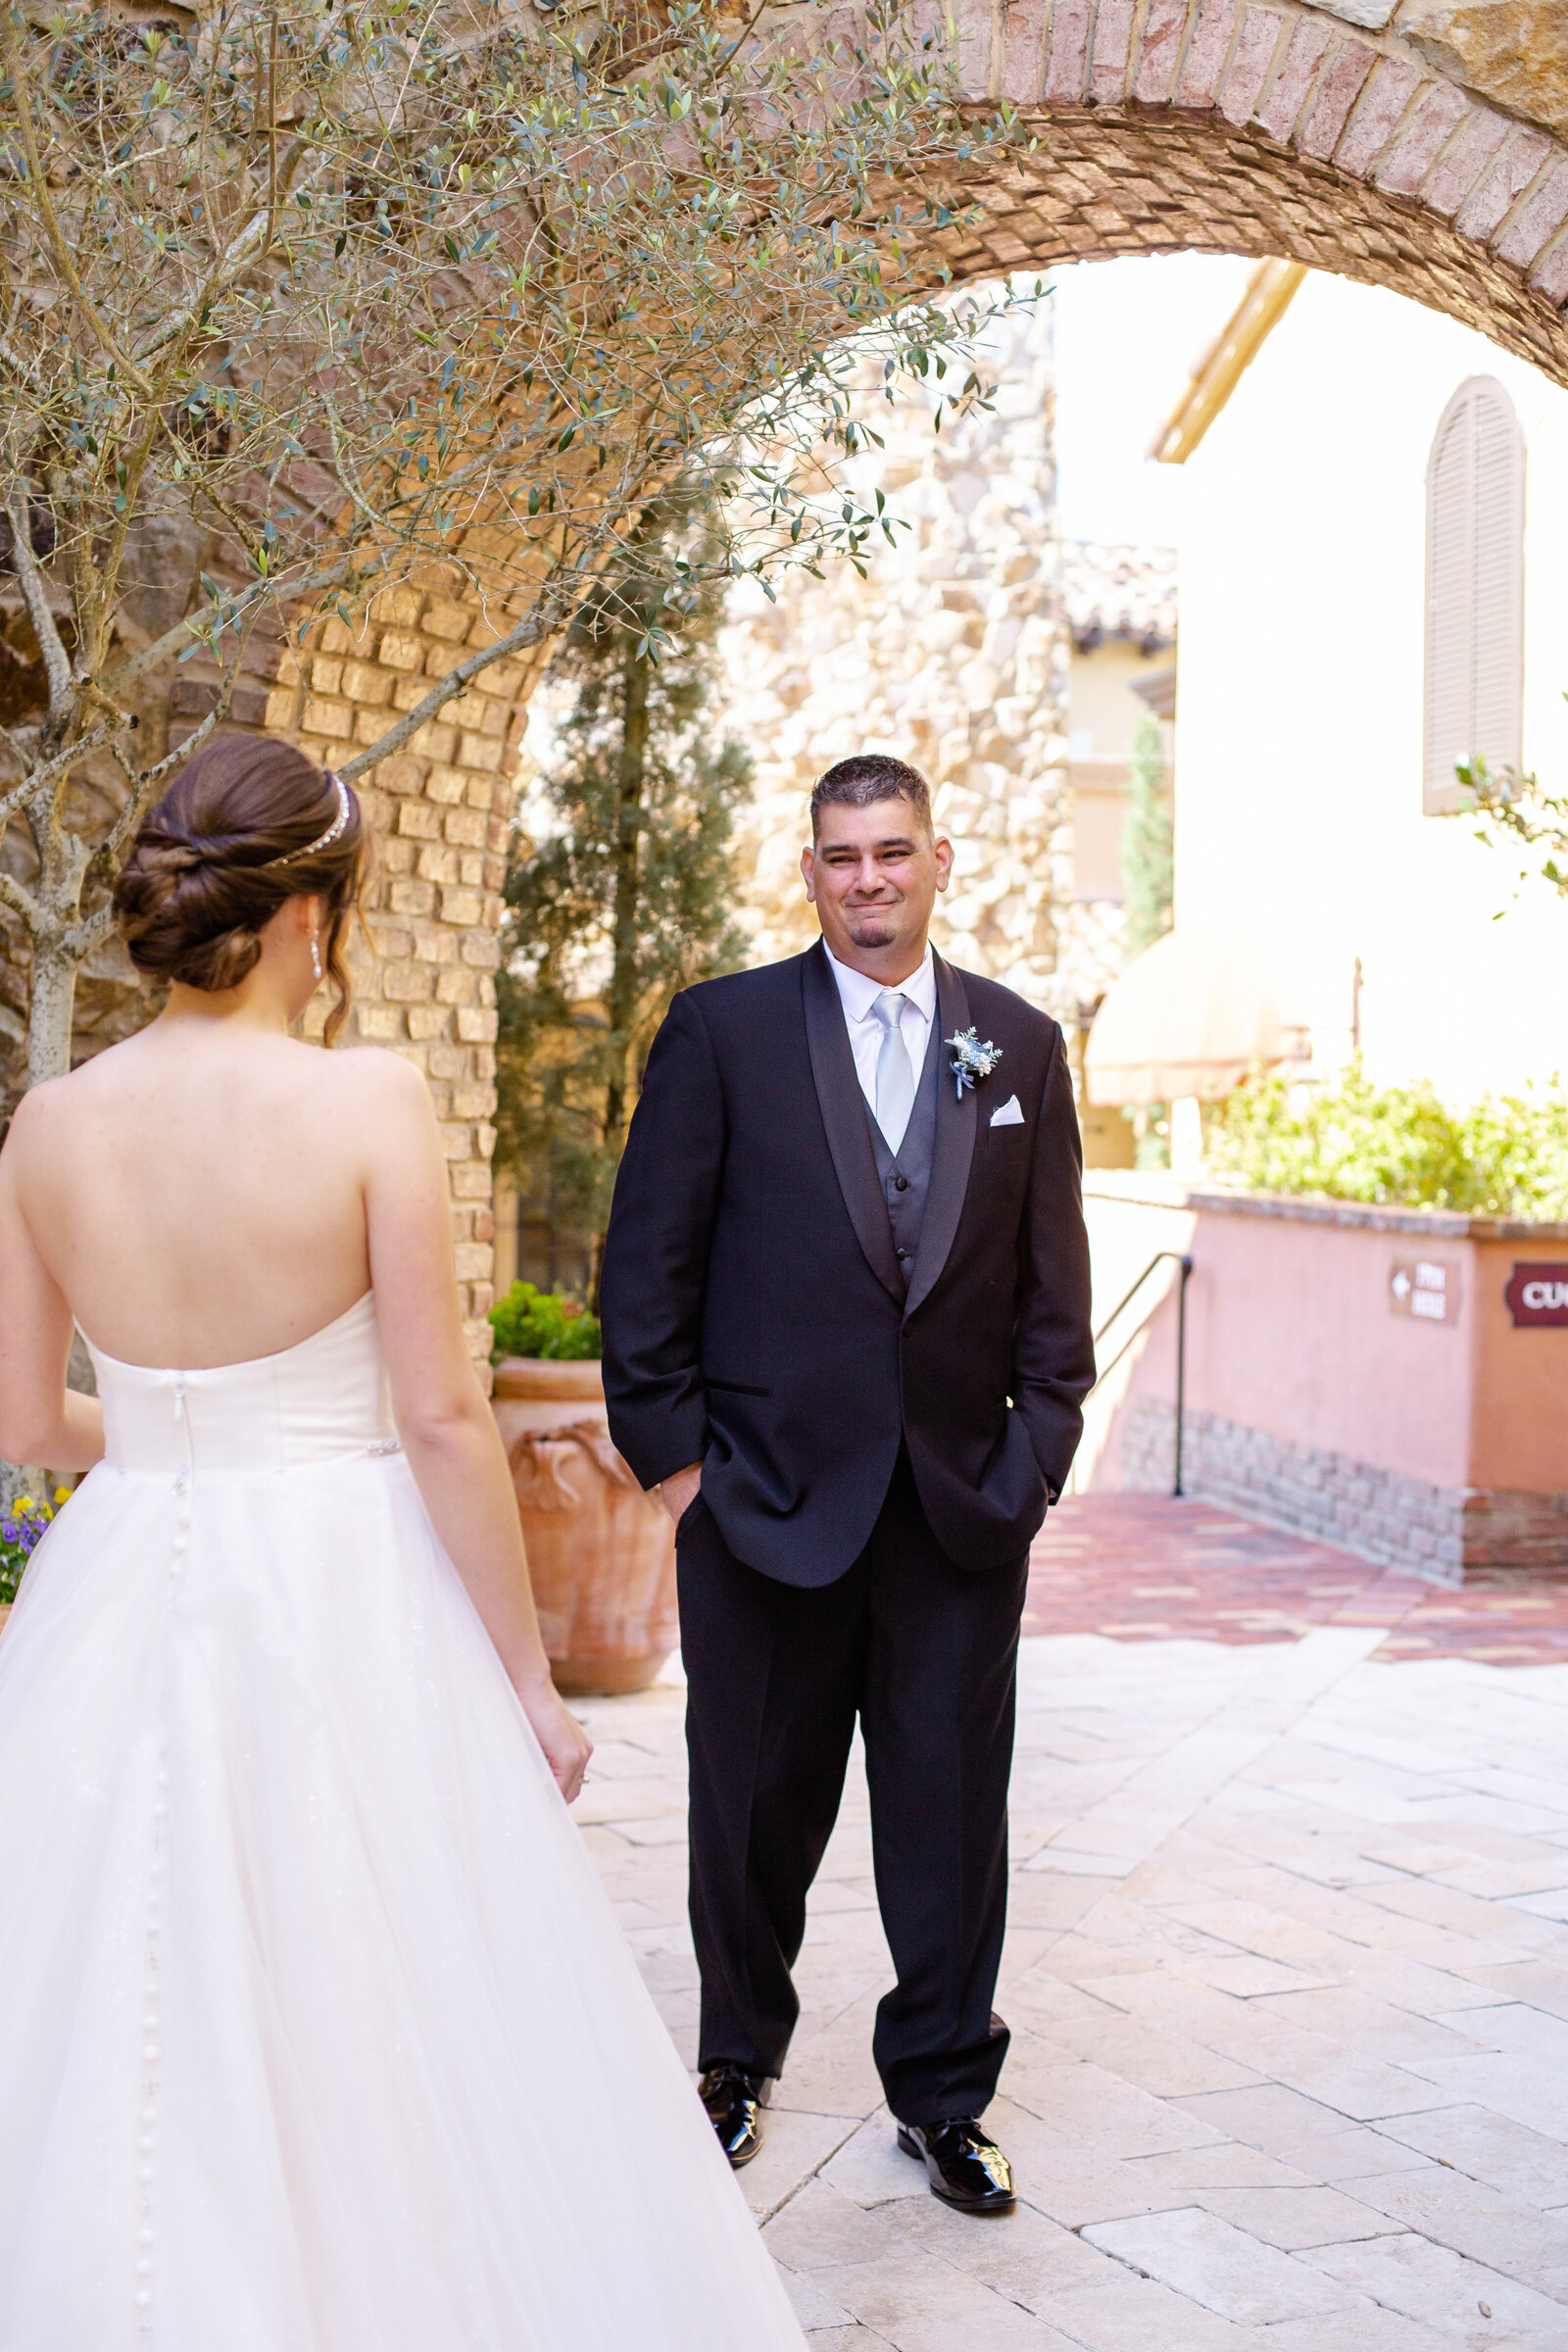 First look captured by Orlando wedding photographer RJP.